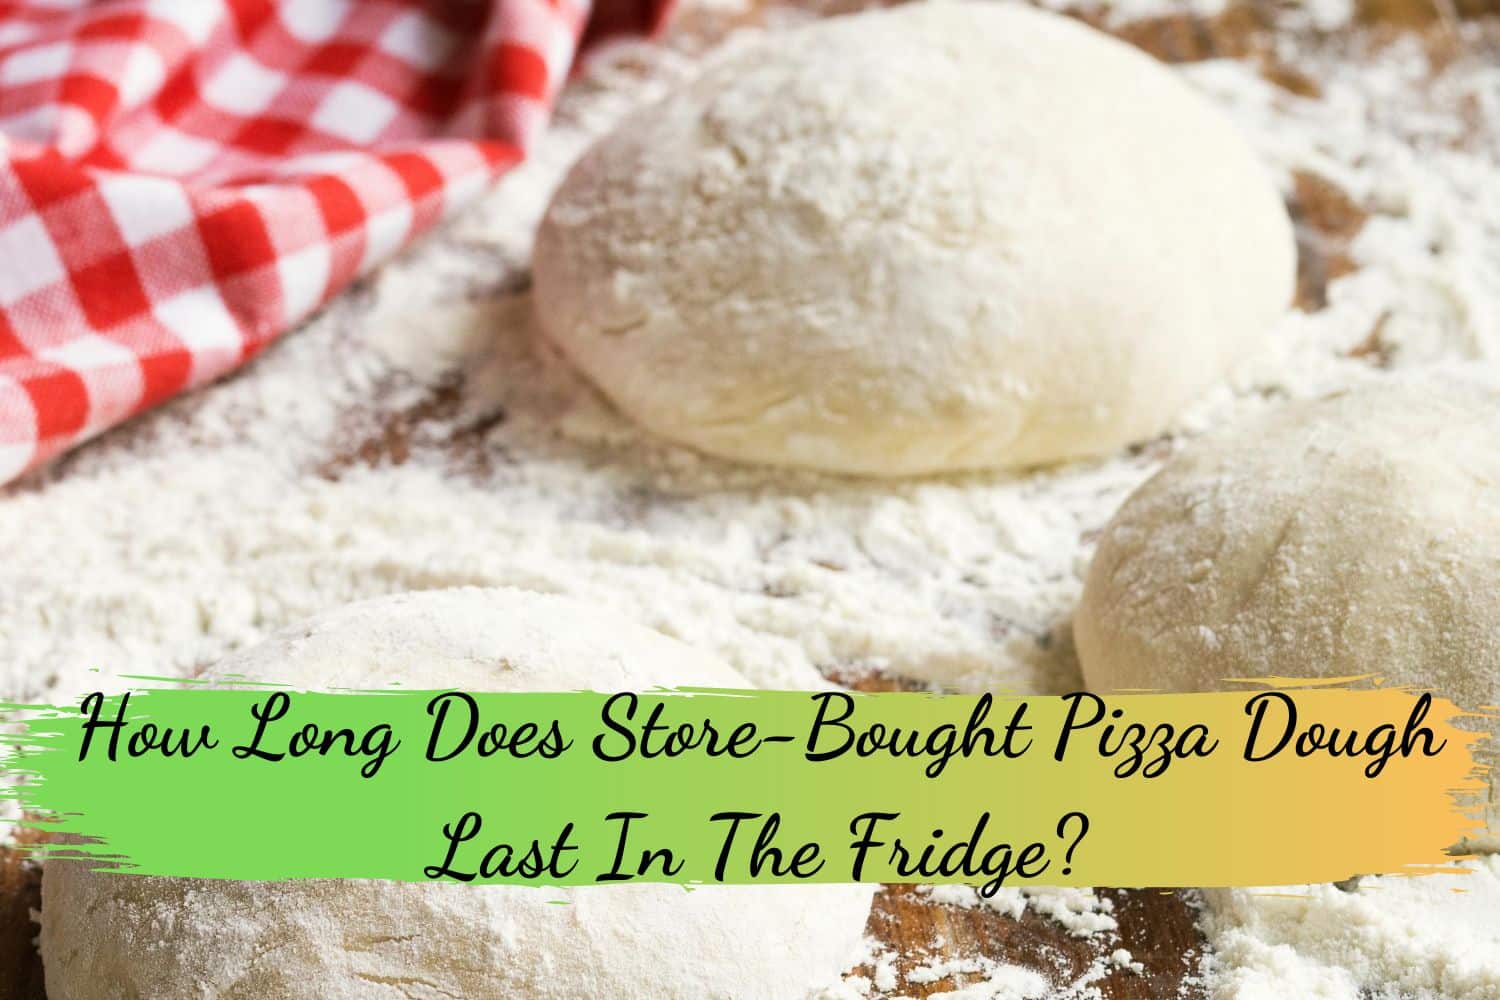 How Long Does Store-Bought Pizza Dough Last In The Fridge